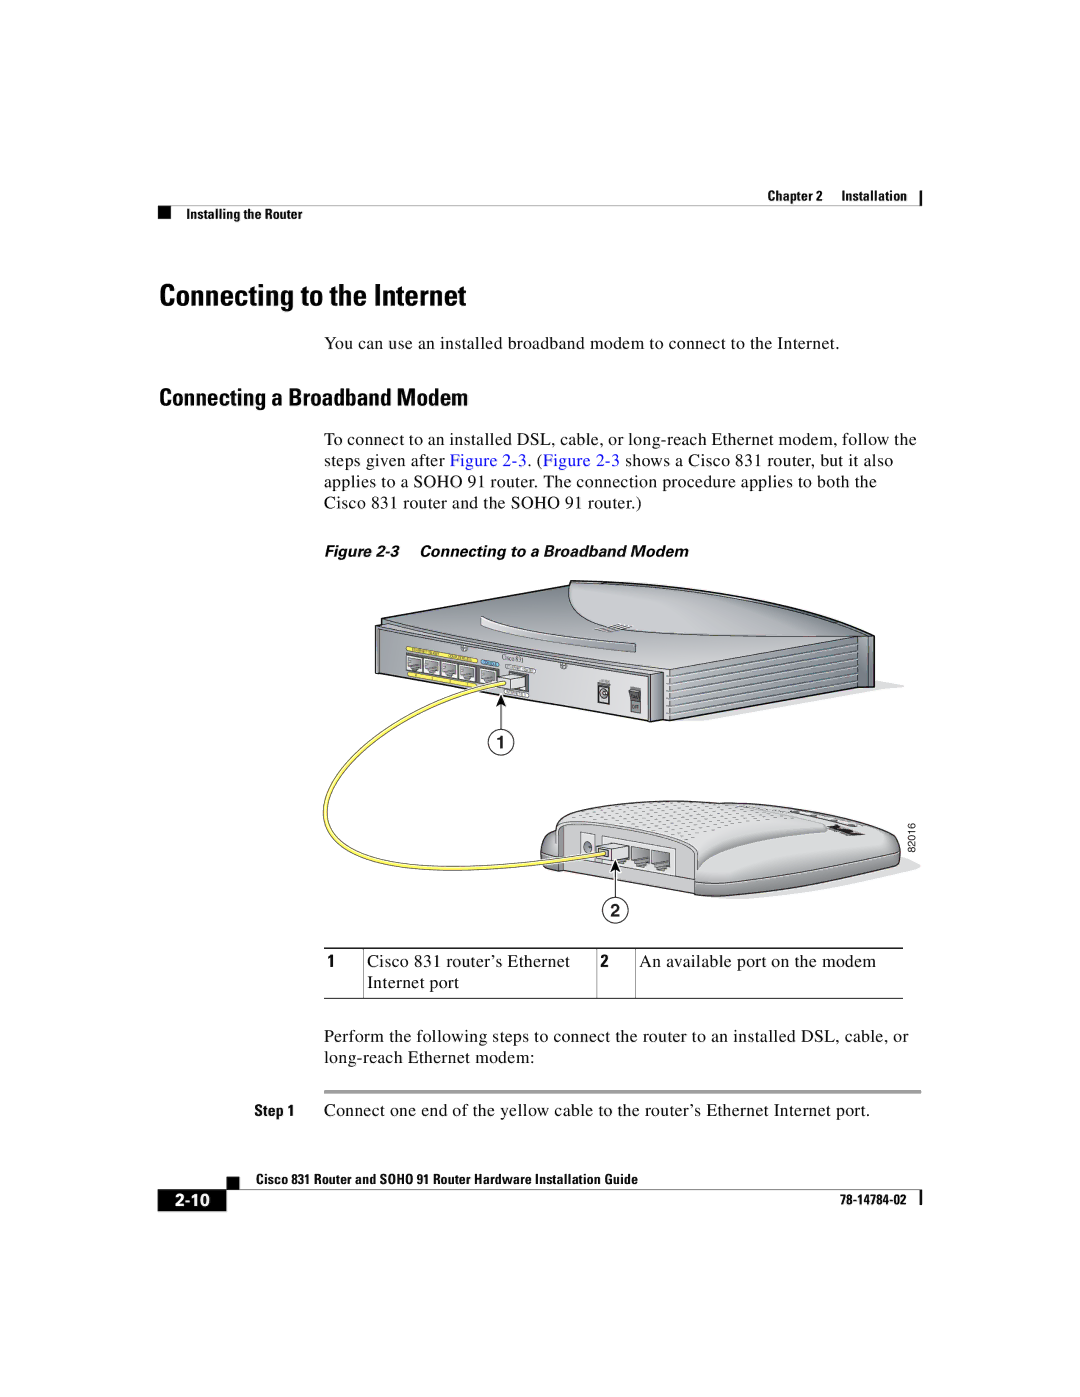 Cisco Systems Cisco 831 manual Connecting to the Internet, Connecting a Broadband Modem 